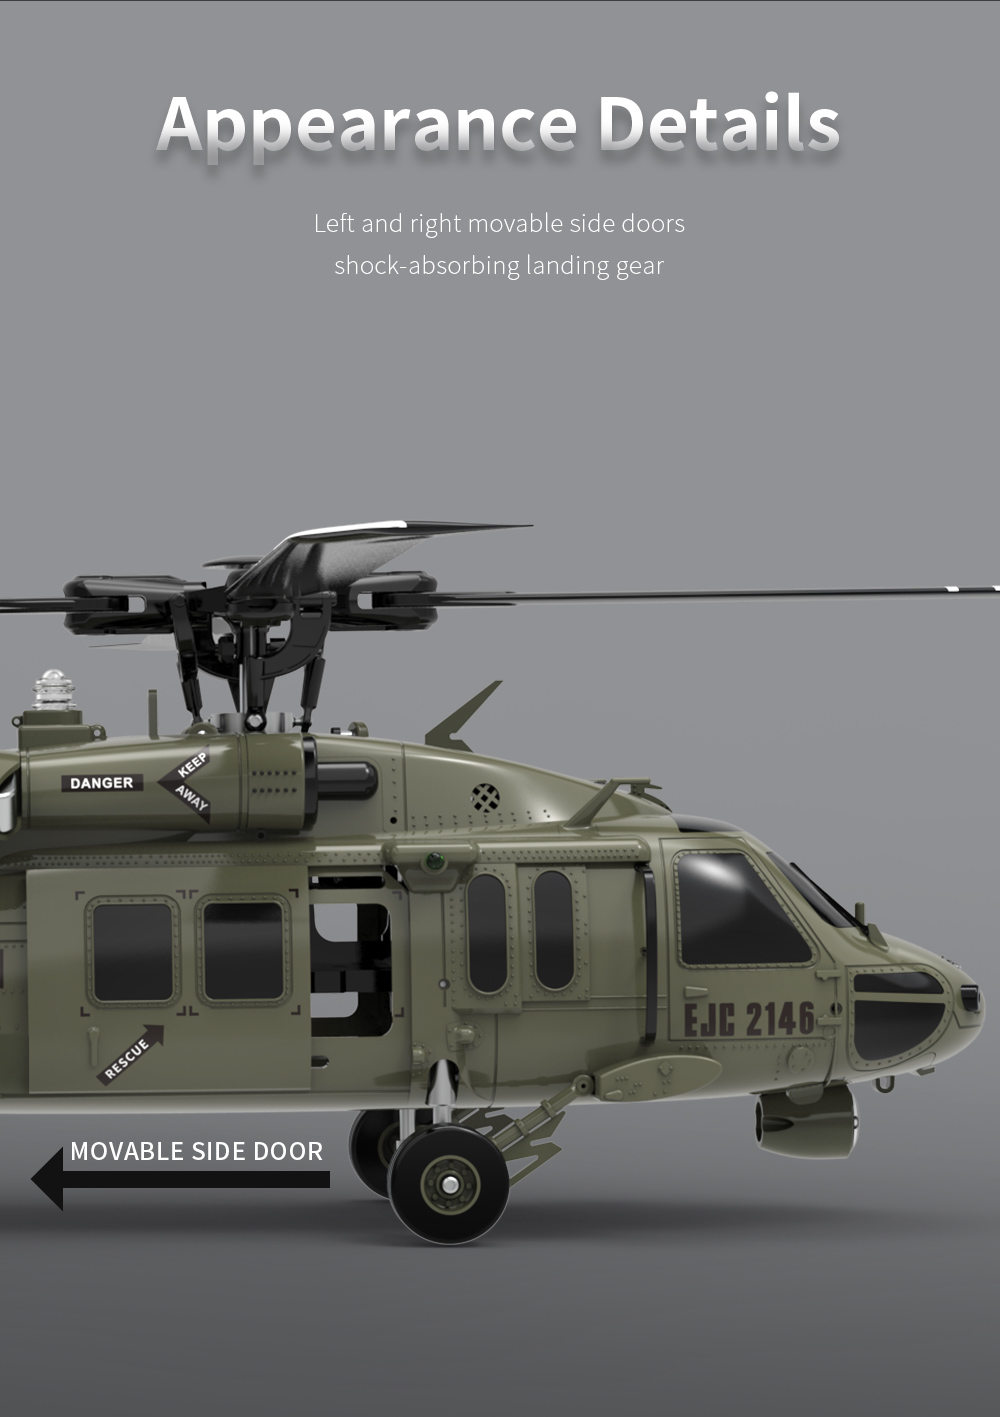 The Newest 2022 Upgrade, Sikorsky Aircraft UH-60 Black Hawk Military Helicopter Remote Control Scale Model, UH60 Blackhawk RC Helicopter